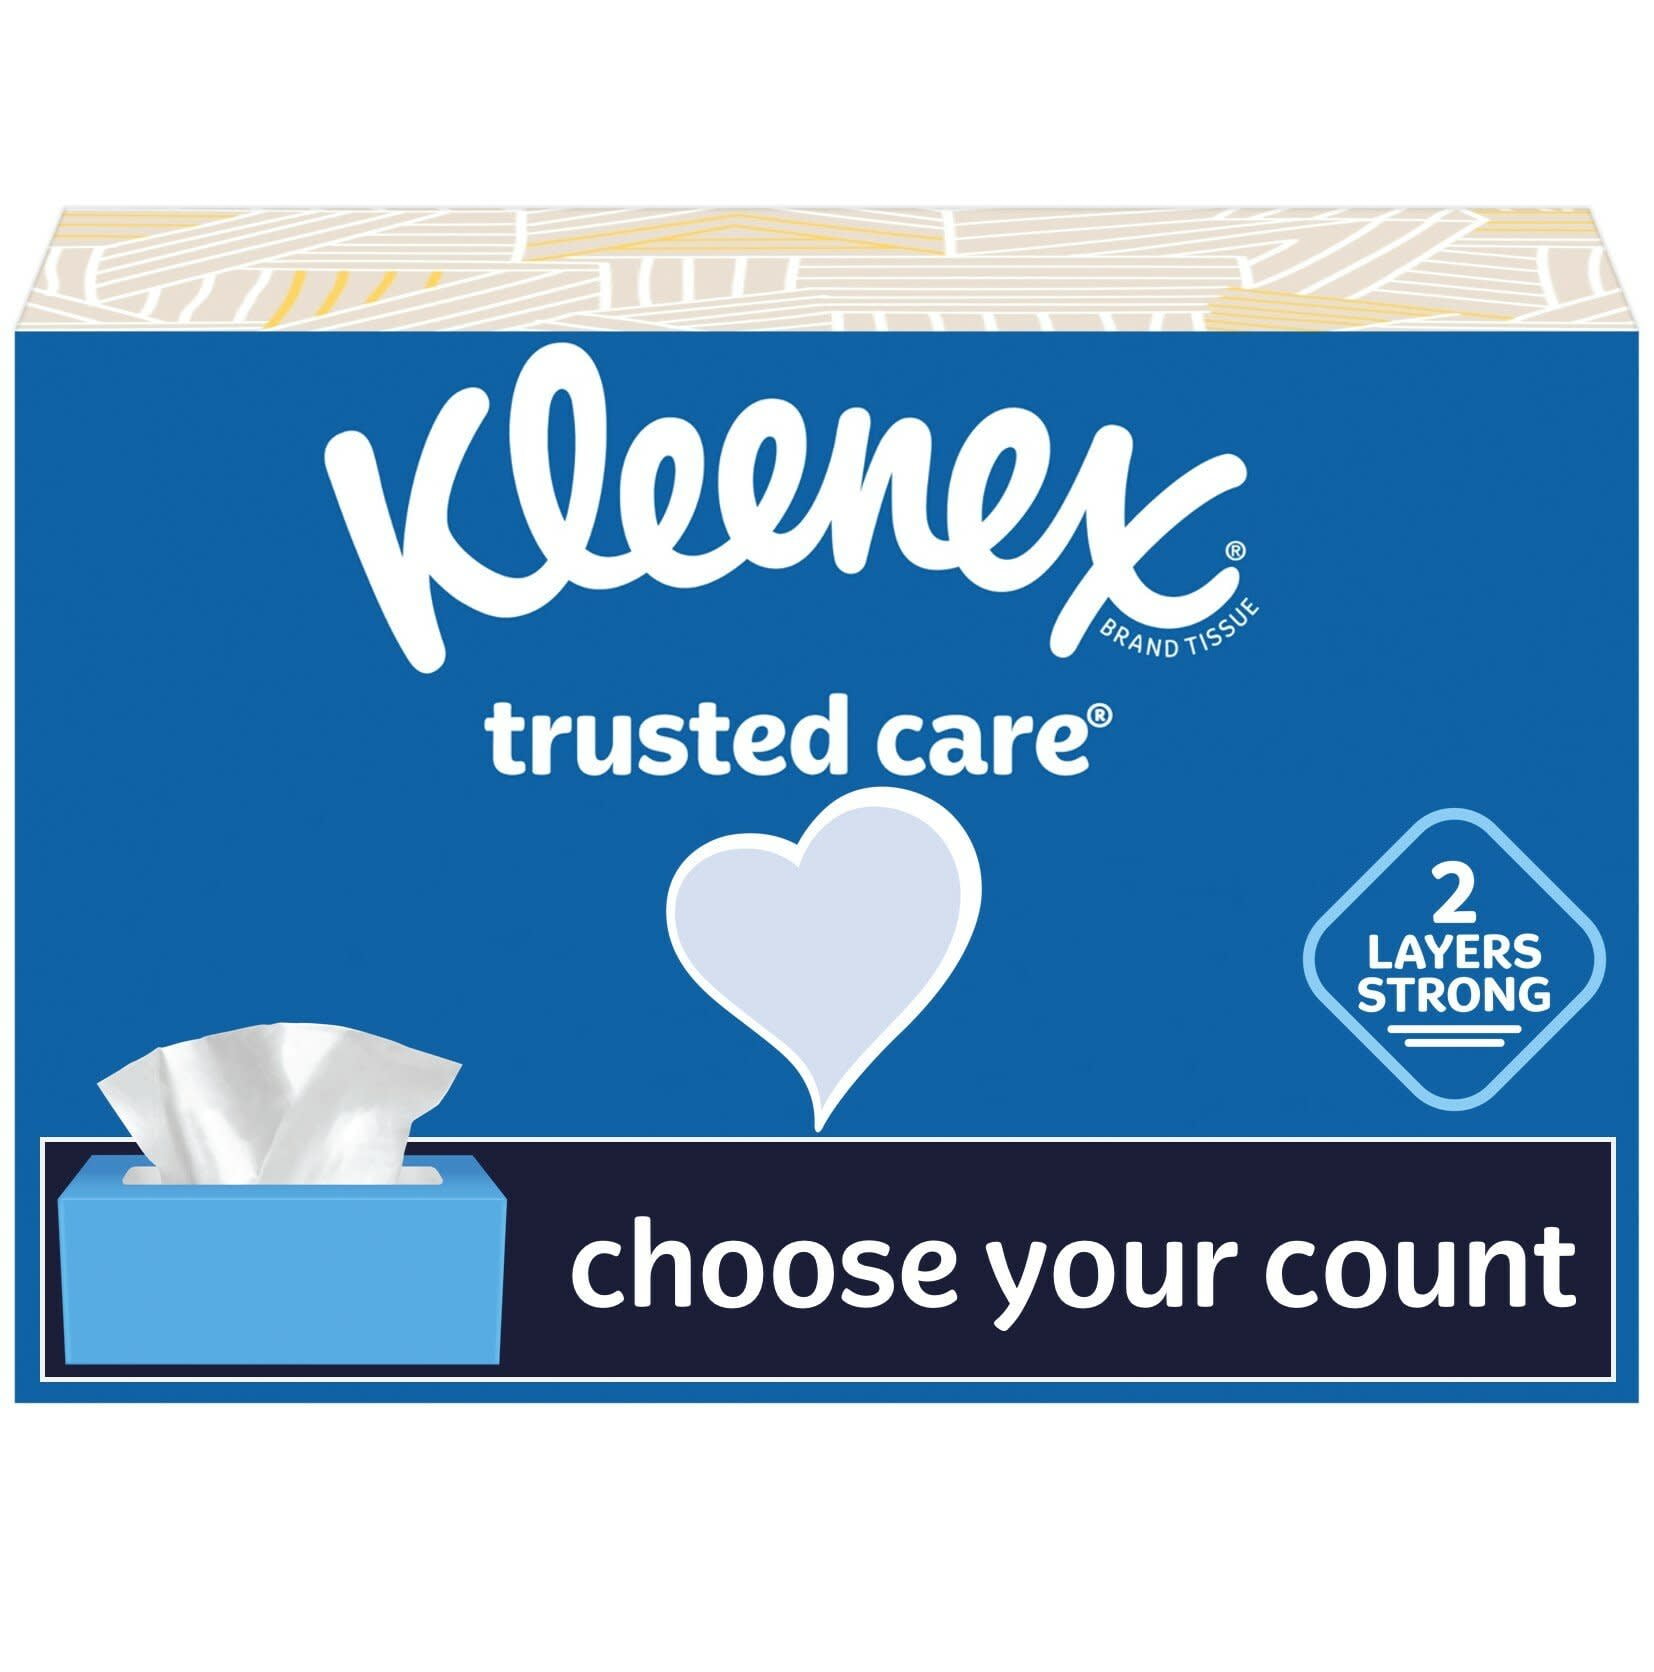 Kleenex Ultra Soft Facial Tissues, 4 Cube Boxes, 75 White Tissues per Box,  3-Ply (300 Total)